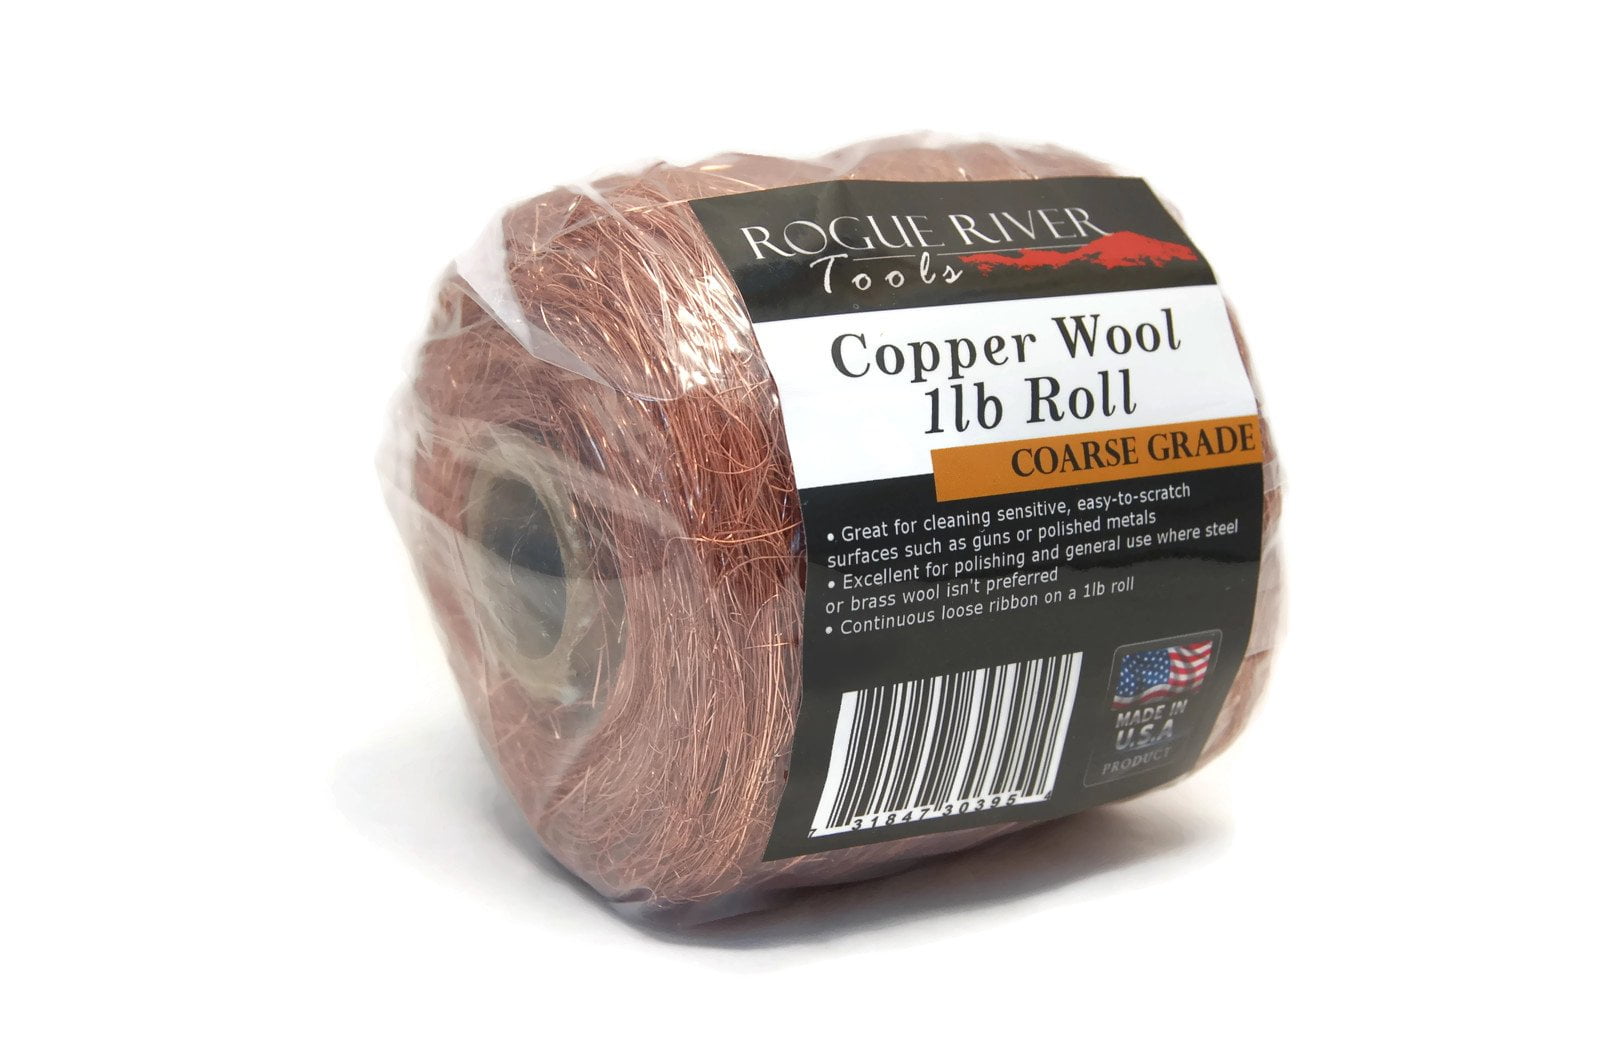 Rogue River Tools Stainless Steel Wool 1lb Roll Made in USA! Medium Grade 